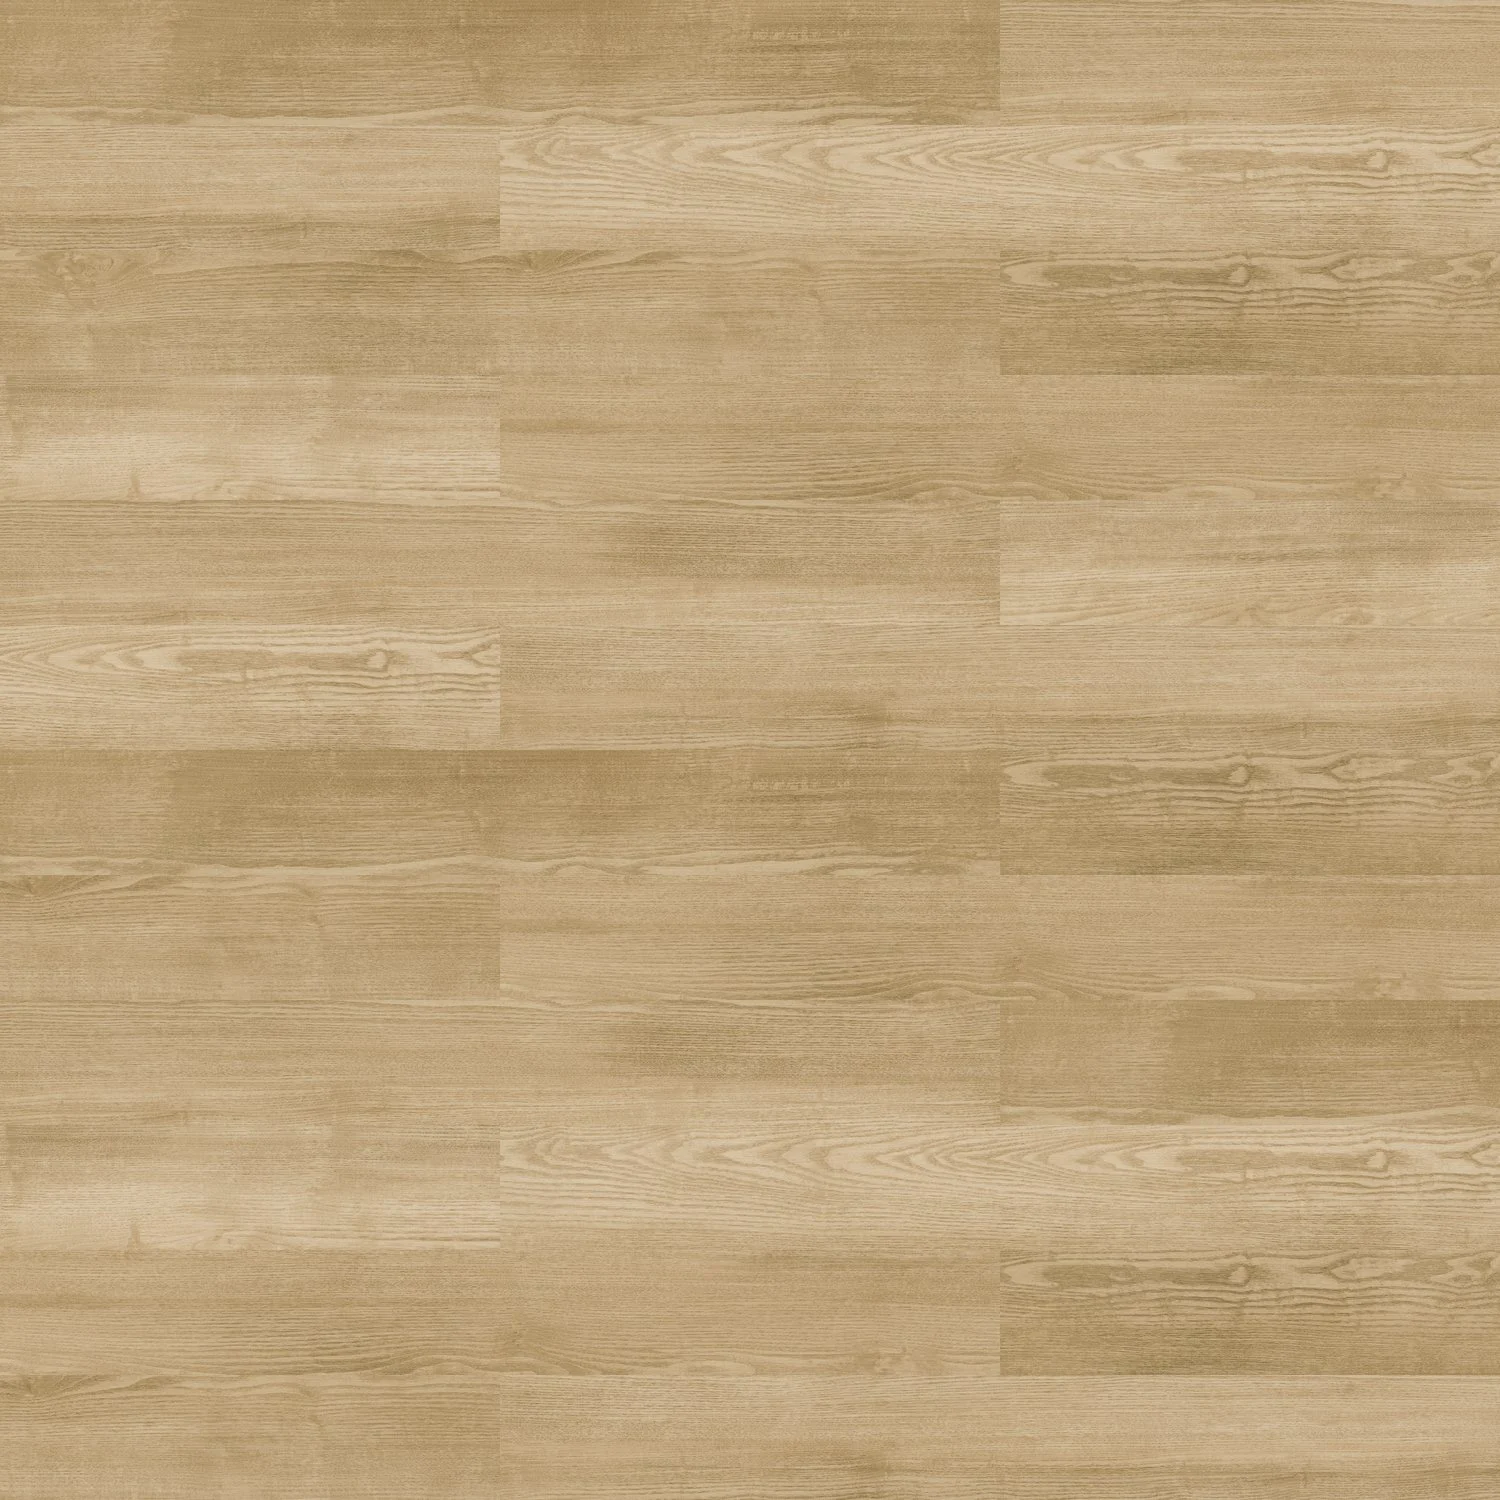 Sprout LVP Commercial Flooring Swatch